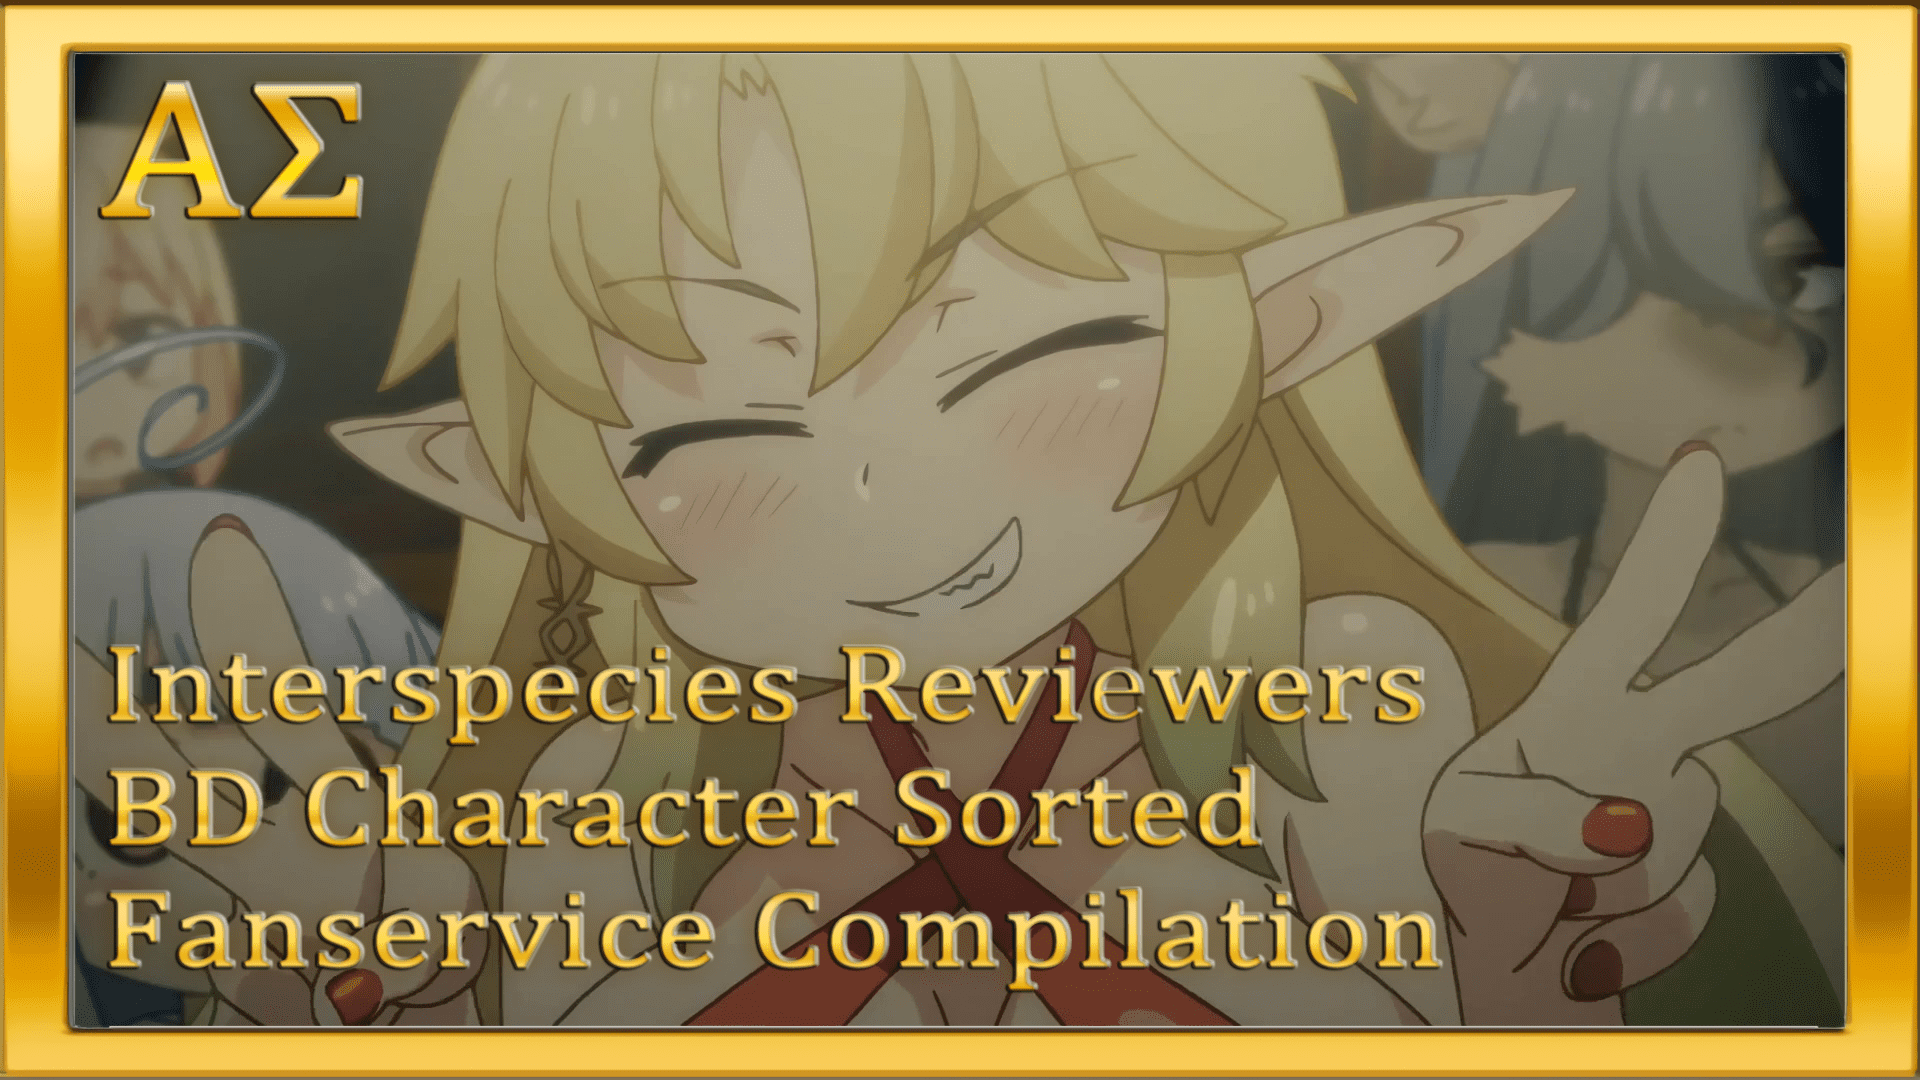 [AΣ] Interspecies Reviewers BD Character Sorted Fanservice Compilation